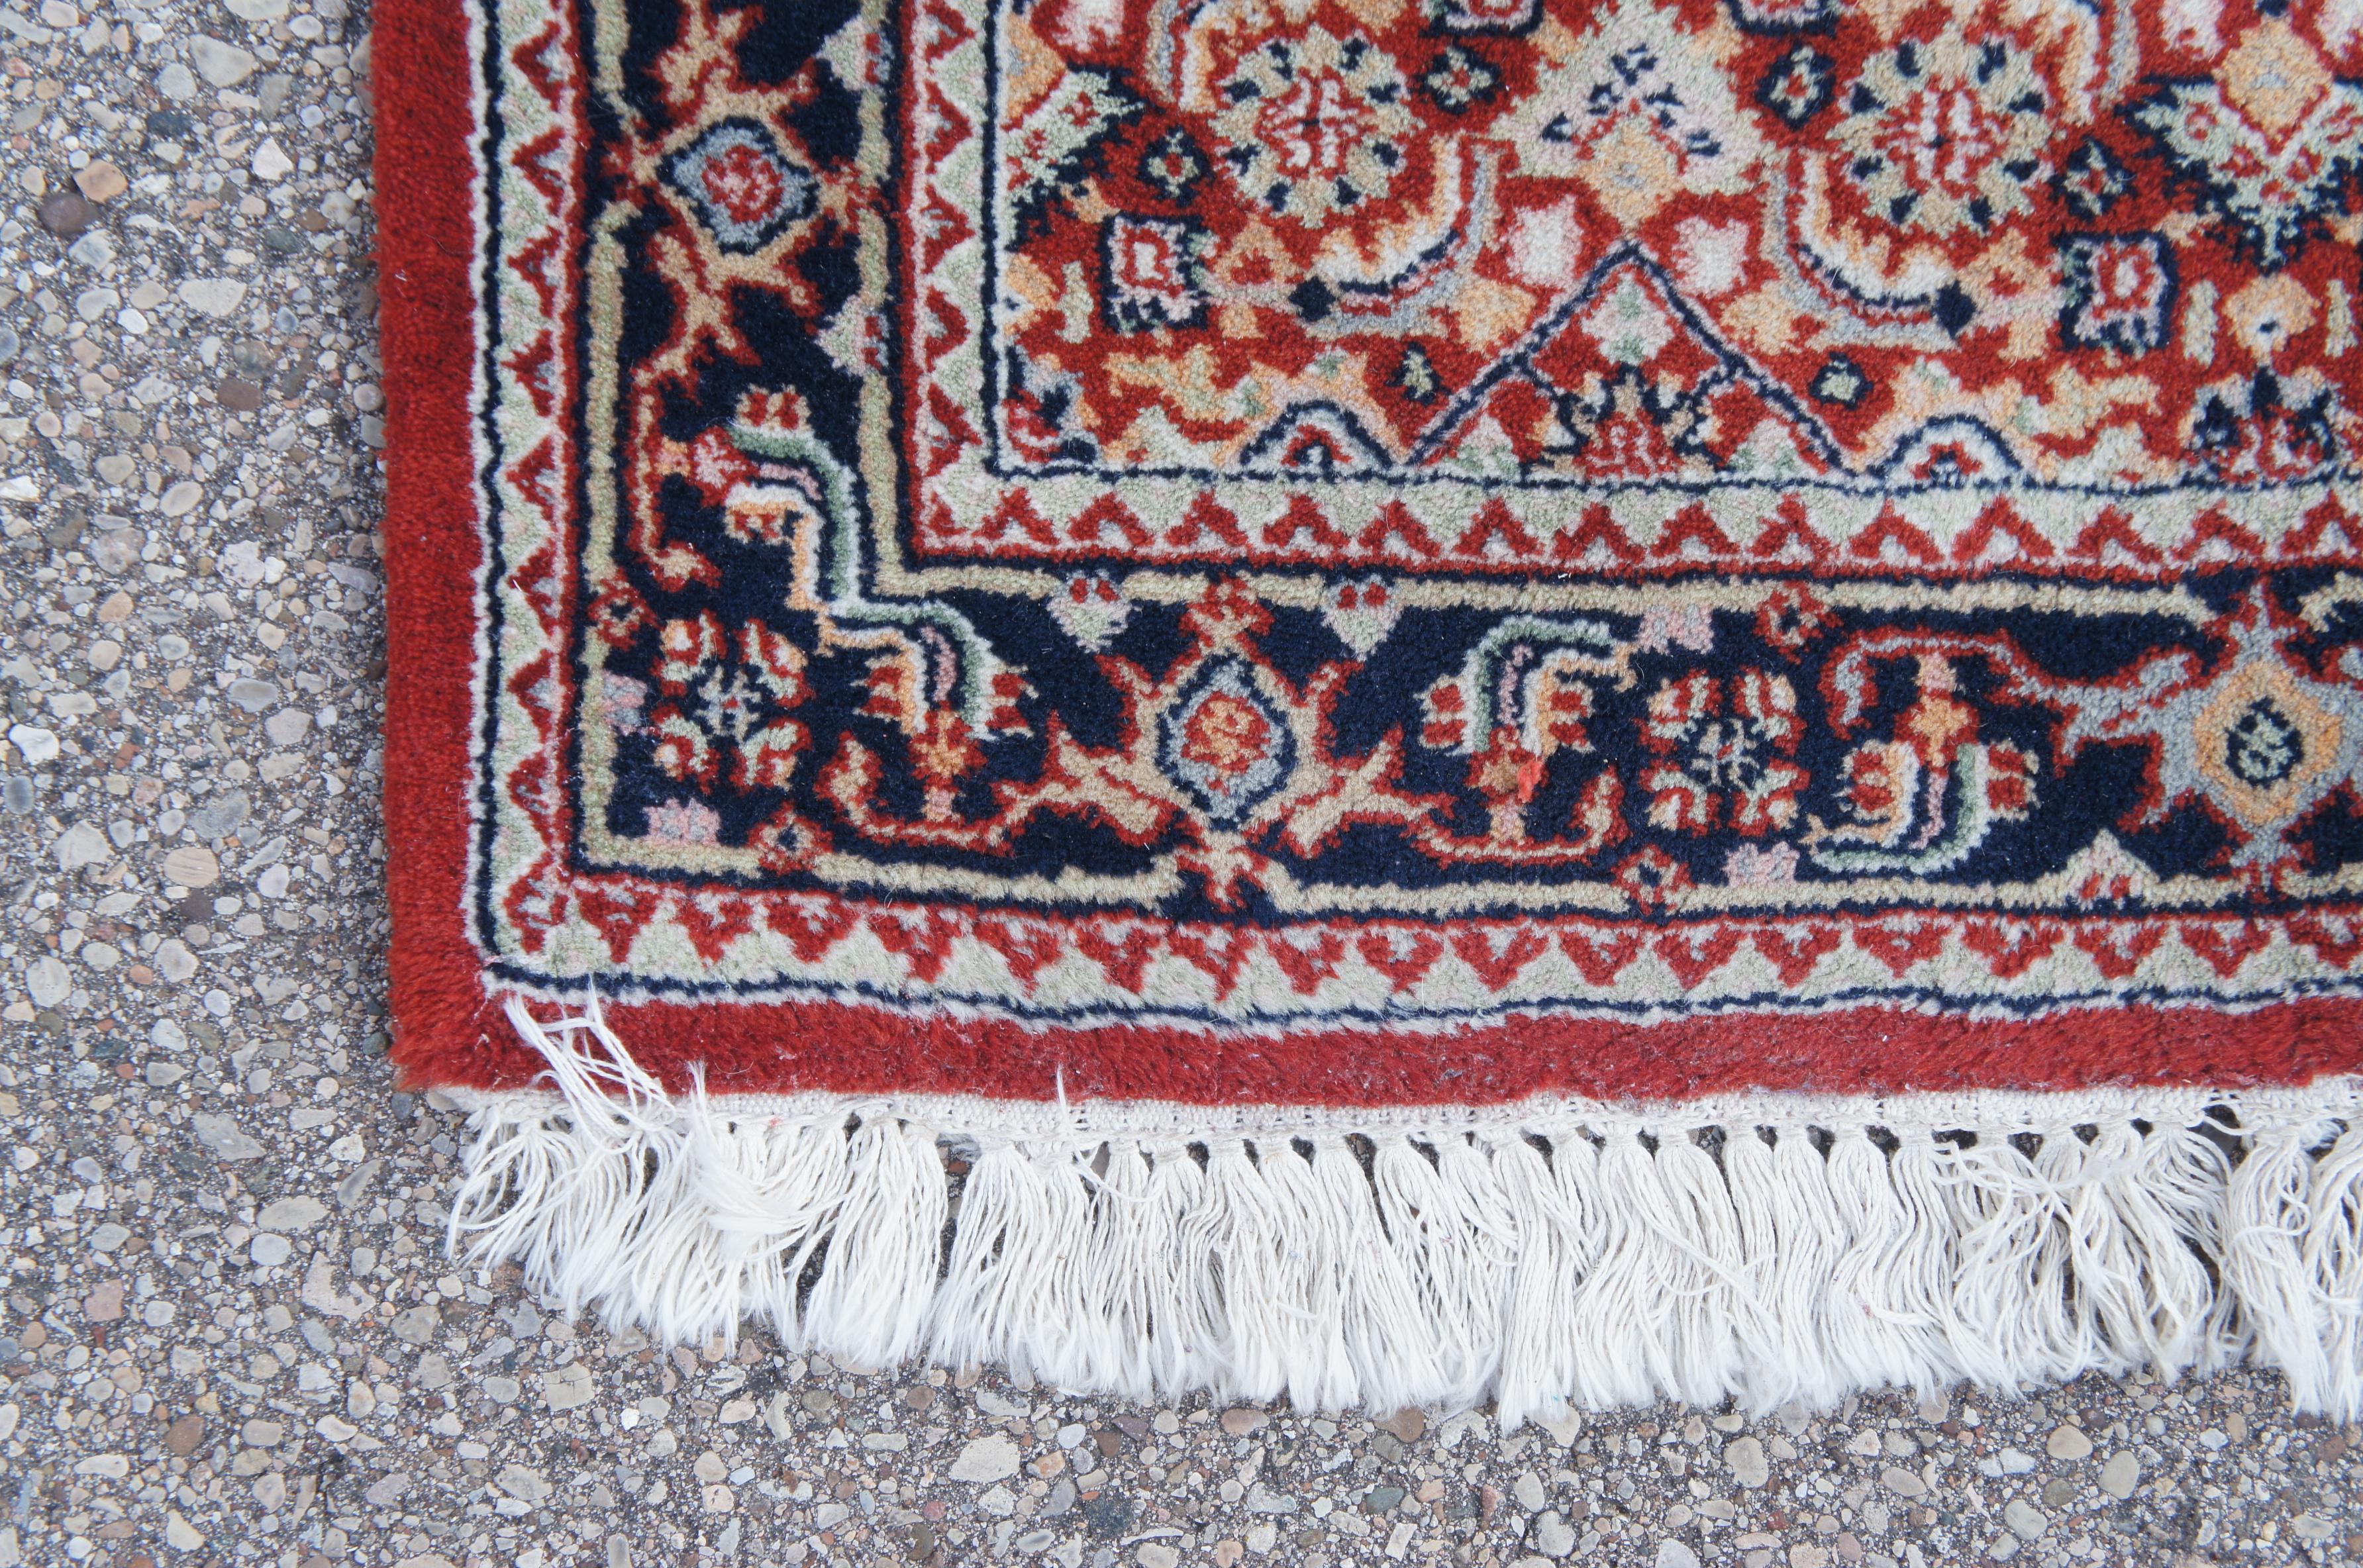 20th Century Vintage Indo-Tabriz Hand Knotted Wool Red & Blue Runner Rug 2.5' x 8' For Sale